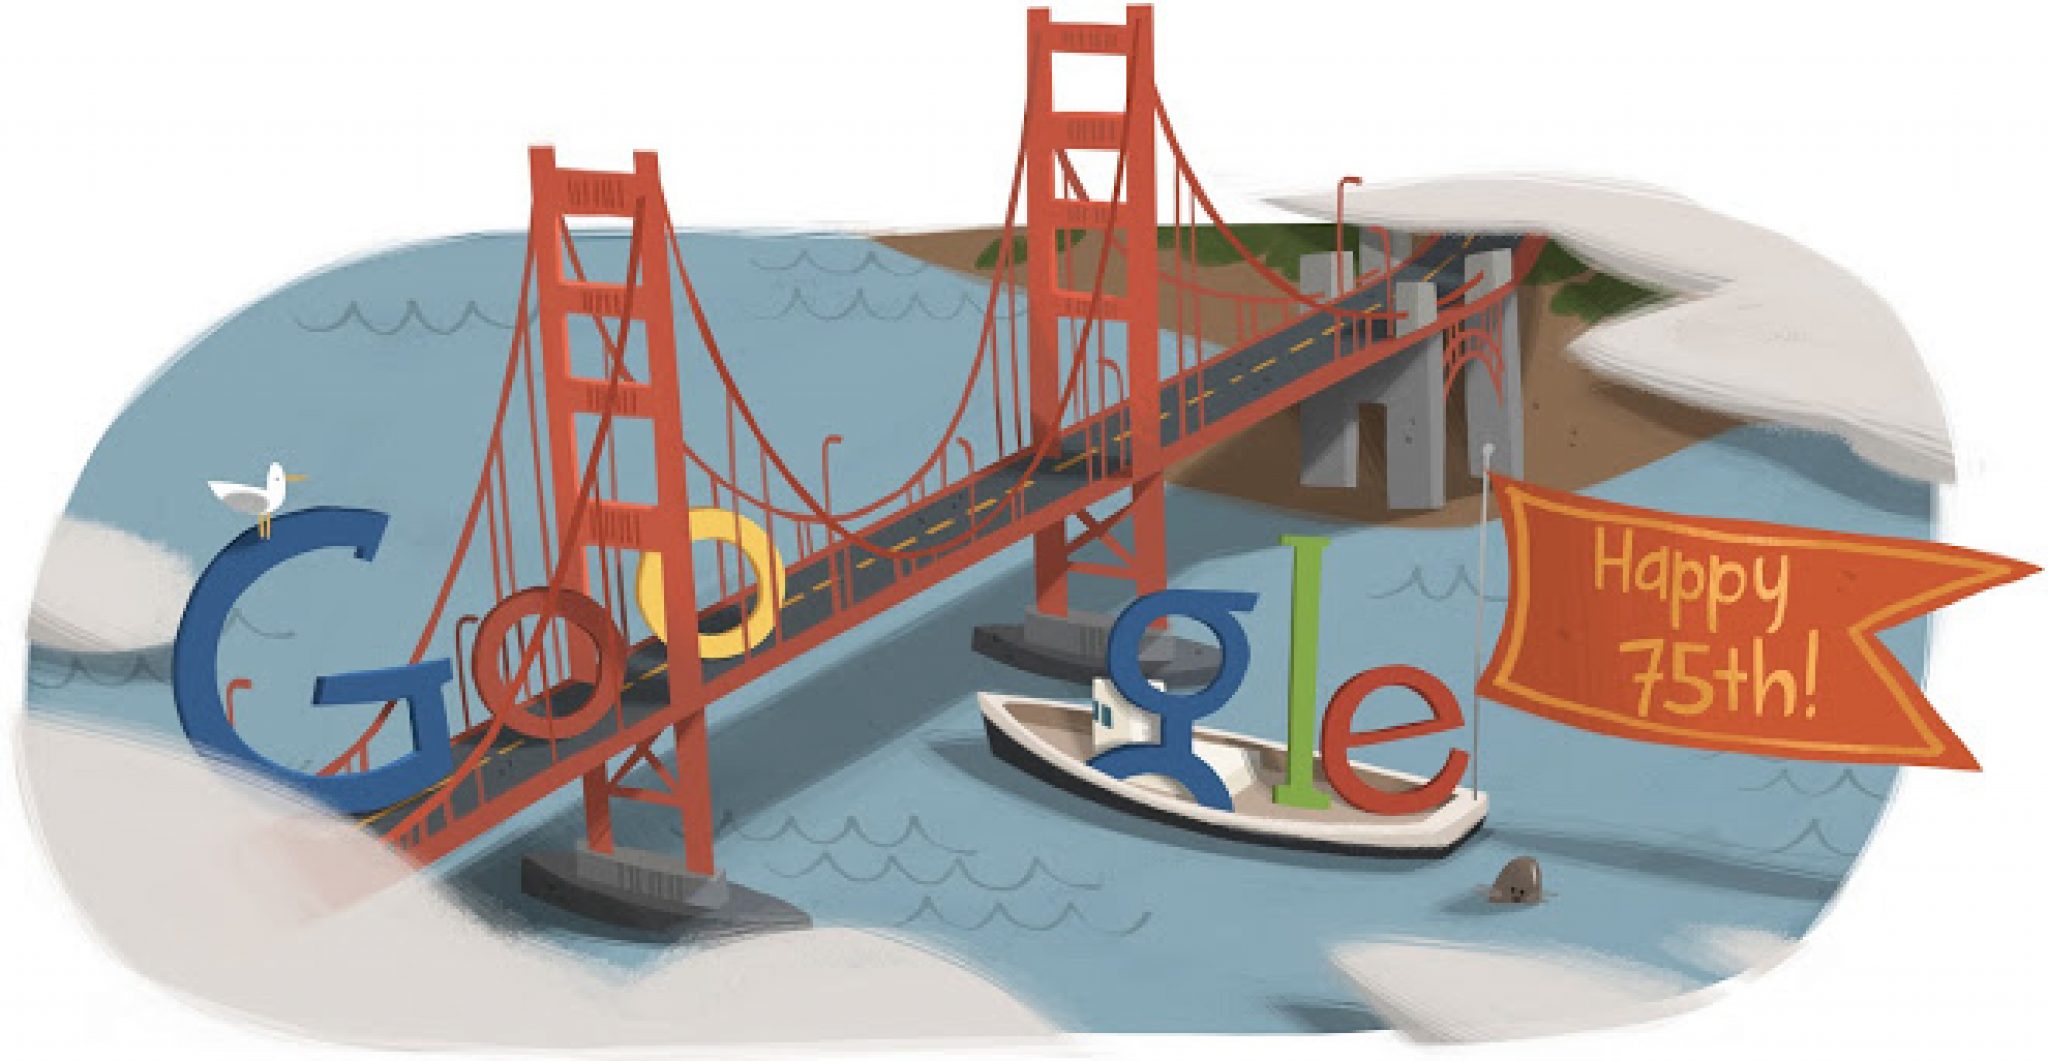 How Google Doodles Celebrate Architects and Architecture